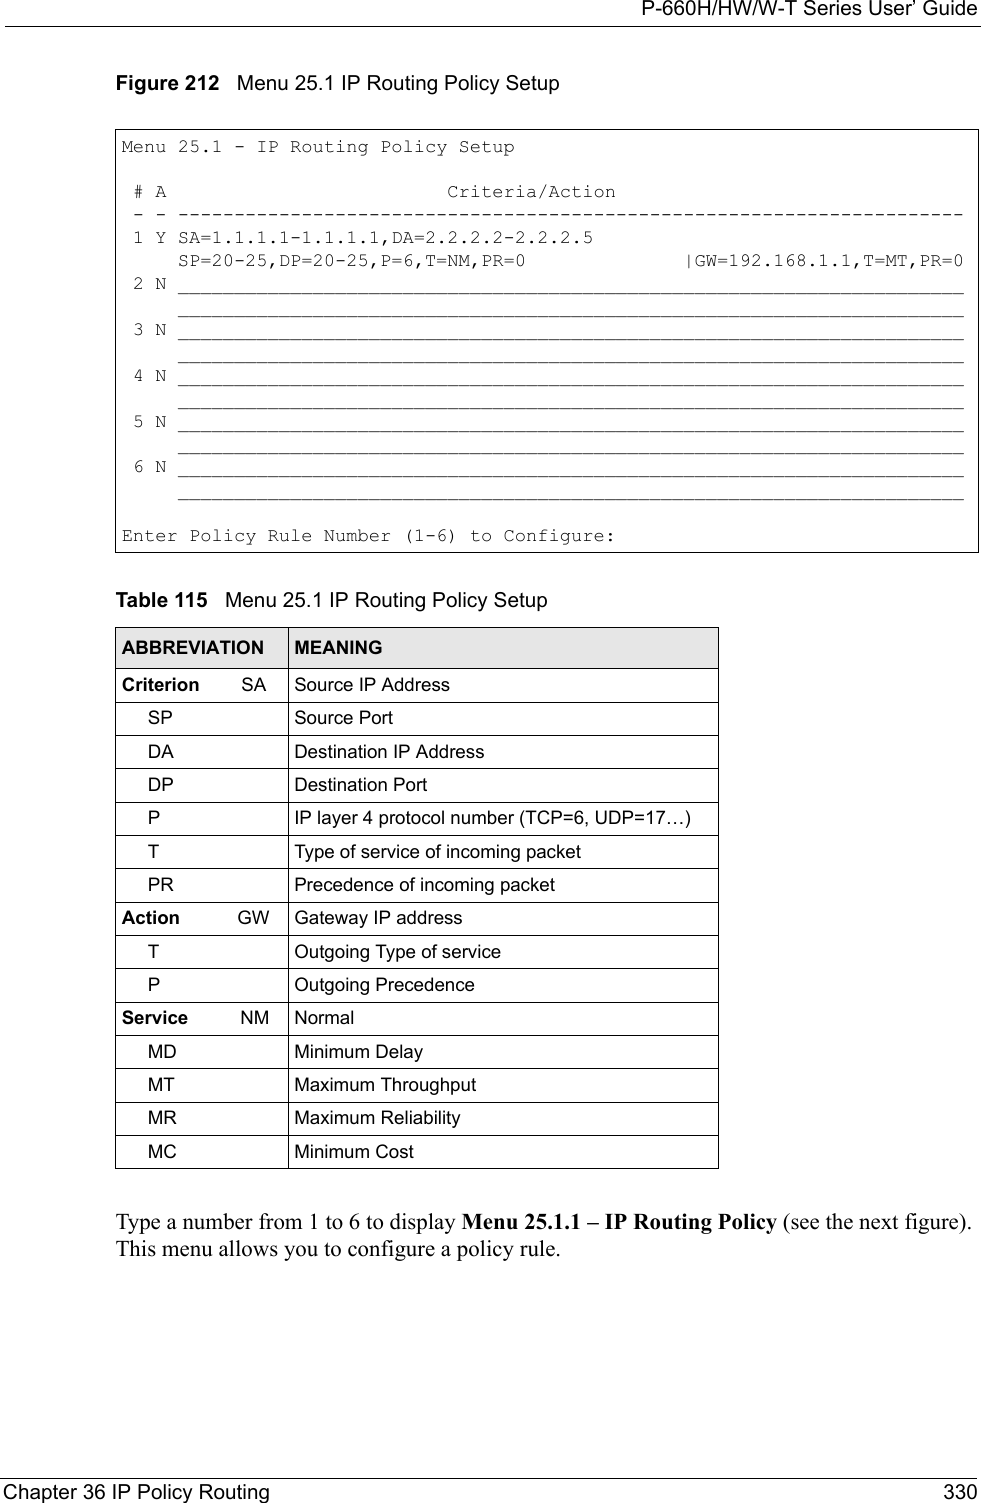 P-660H/HW/W-T Series User’ GuideChapter 36 IP Policy Routing 330Figure 212   Menu 25.1 IP Routing Policy SetupType a number from 1 to 6 to display Menu 25.1.1 – IP Routing Policy (see the next figure). This menu allows you to configure a policy rule.Menu 25.1 - IP Routing Policy Setup # A                         Criteria/Action - - ---------------------------------------------------------------------- 1 Y SA=1.1.1.1-1.1.1.1,DA=2.2.2.2-2.2.2.5     SP=20-25,DP=20-25,P=6,T=NM,PR=0              |GW=192.168.1.1,T=MT,PR=0 2 N ______________________________________________________________________     ______________________________________________________________________ 3 N ______________________________________________________________________     ______________________________________________________________________ 4 N ______________________________________________________________________     ______________________________________________________________________ 5 N ______________________________________________________________________     ______________________________________________________________________ 6 N ______________________________________________________________________     ______________________________________________________________________Enter Policy Rule Number (1-6) to Configure:Table 115   Menu 25.1 IP Routing Policy SetupABBREVIATION MEANINGCriterion        SA Source IP Address     SP Source Port     DA Destination IP Address     DP Destination Port     P IP layer 4 protocol number (TCP=6, UDP=17…)     T Type of service of incoming packet     PR Precedence of incoming packetAction           GW Gateway IP address     T Outgoing Type of service     P Outgoing PrecedenceService          NM Normal     MD Minimum Delay     MT Maximum Throughput     MR Maximum Reliability     MC Minimum Cost